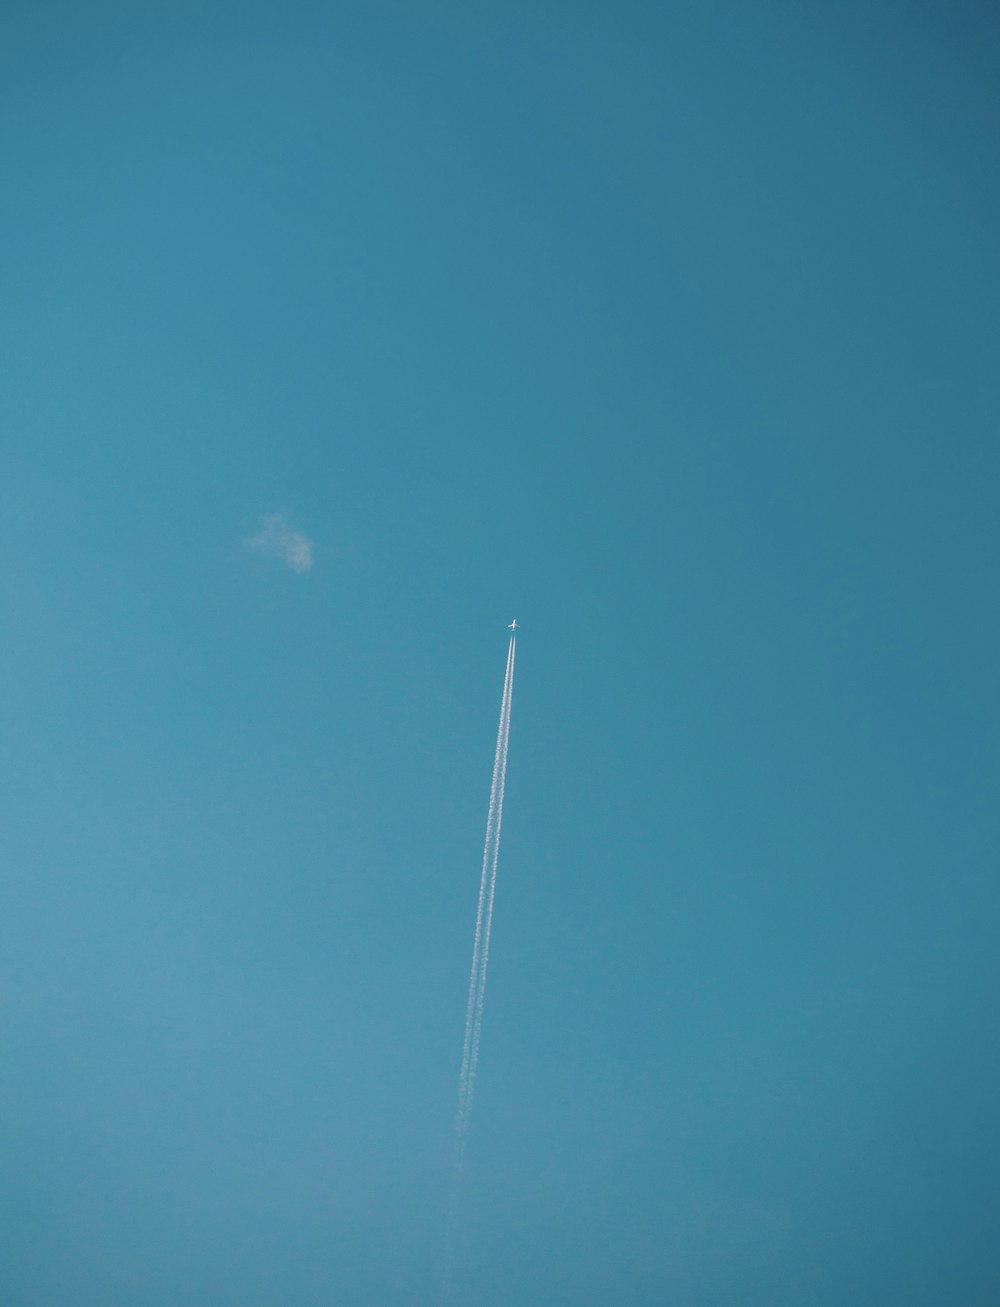 an airplane is flying high in the sky